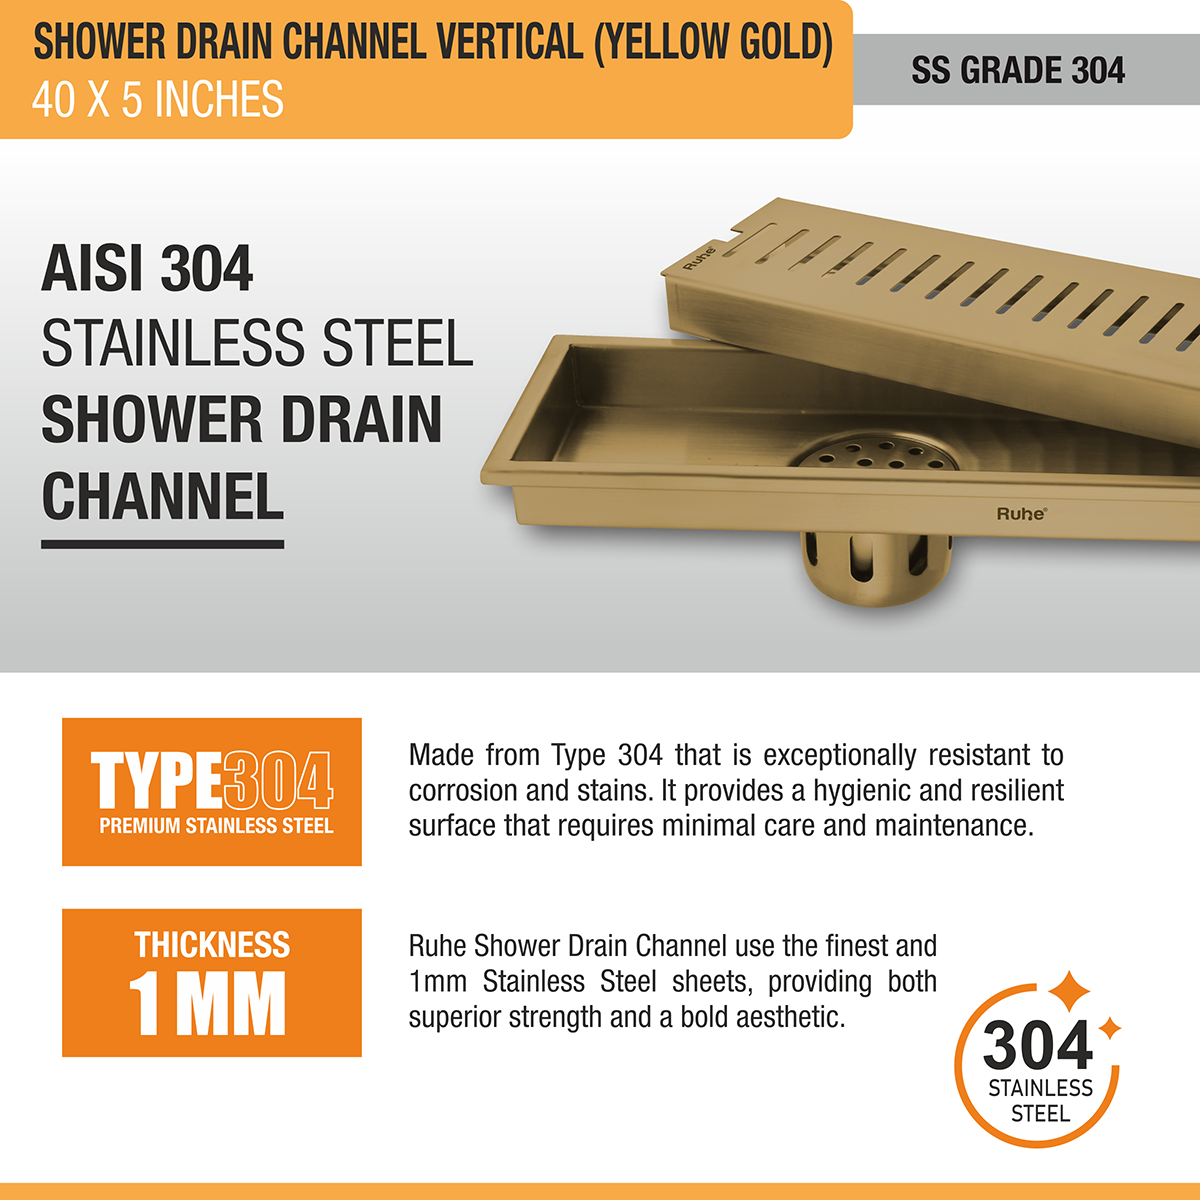 Vertical Shower Drain Channel (40 x 5 Inches) YELLOW GOLD stainless steel